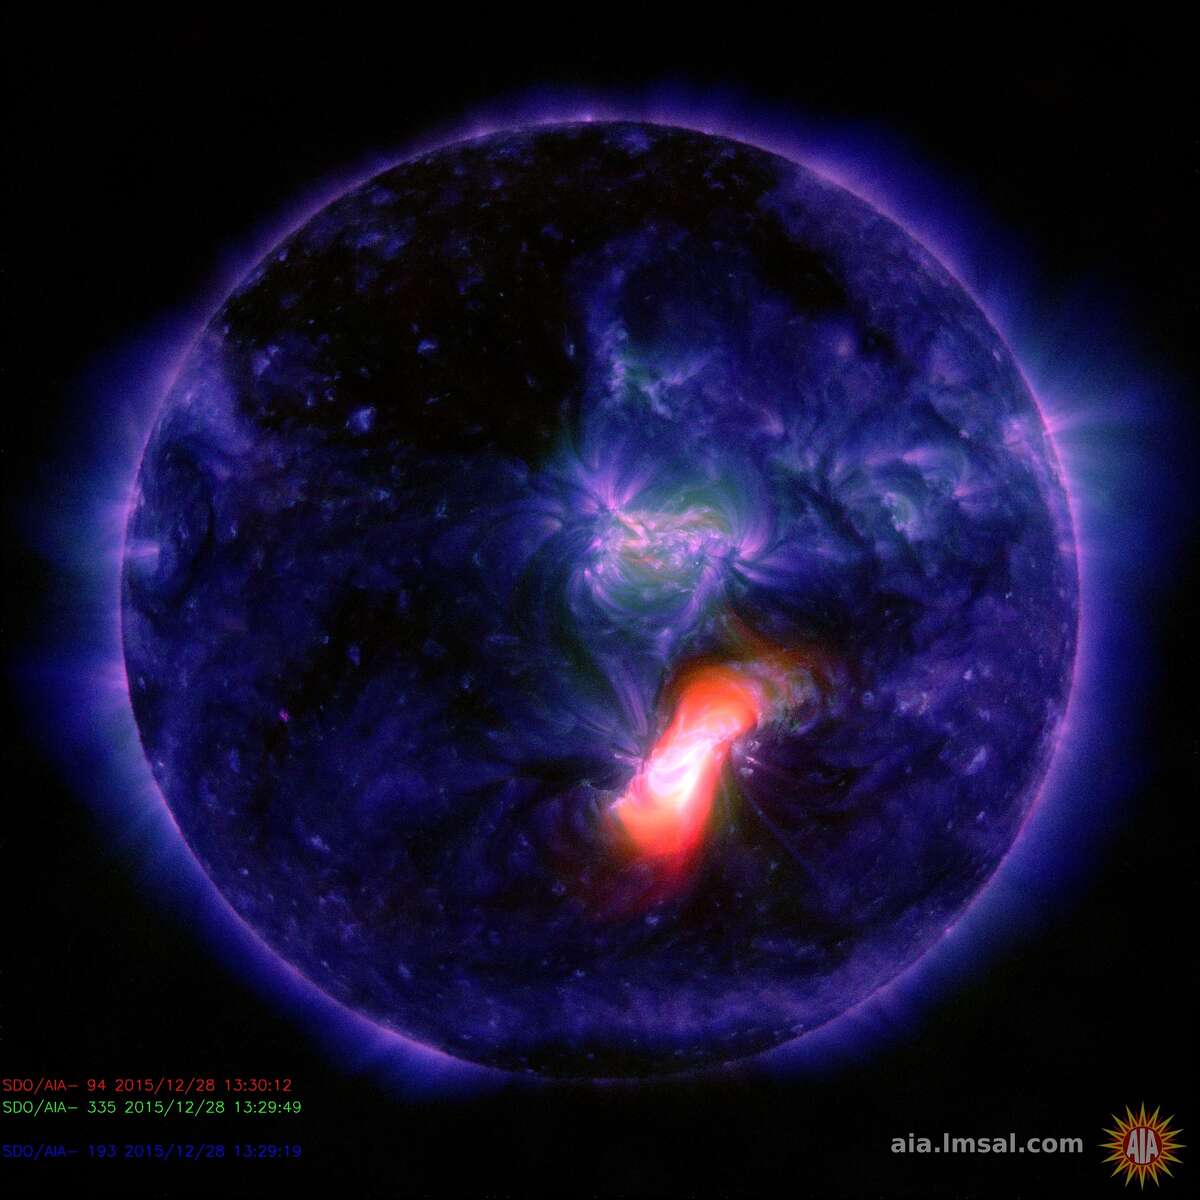 Sunspot erupts 12/28/2015 (image from http://aia.lmsal.com/)